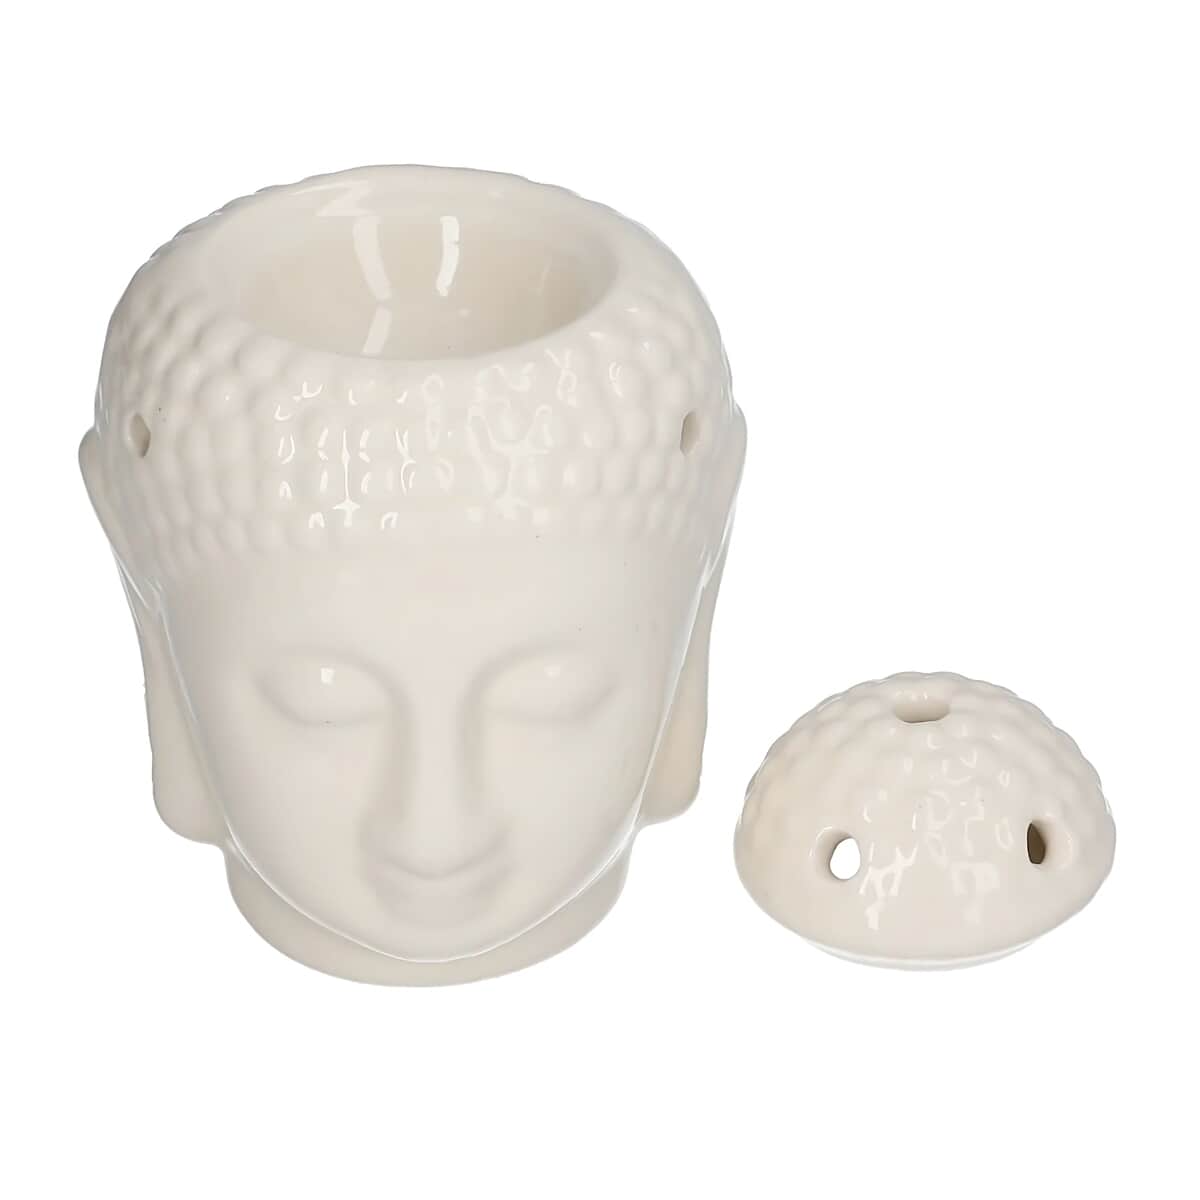 Beige Ceramic Buddha Head Tealight Candle Holder with Aromatherapy Oil Burner image number 6